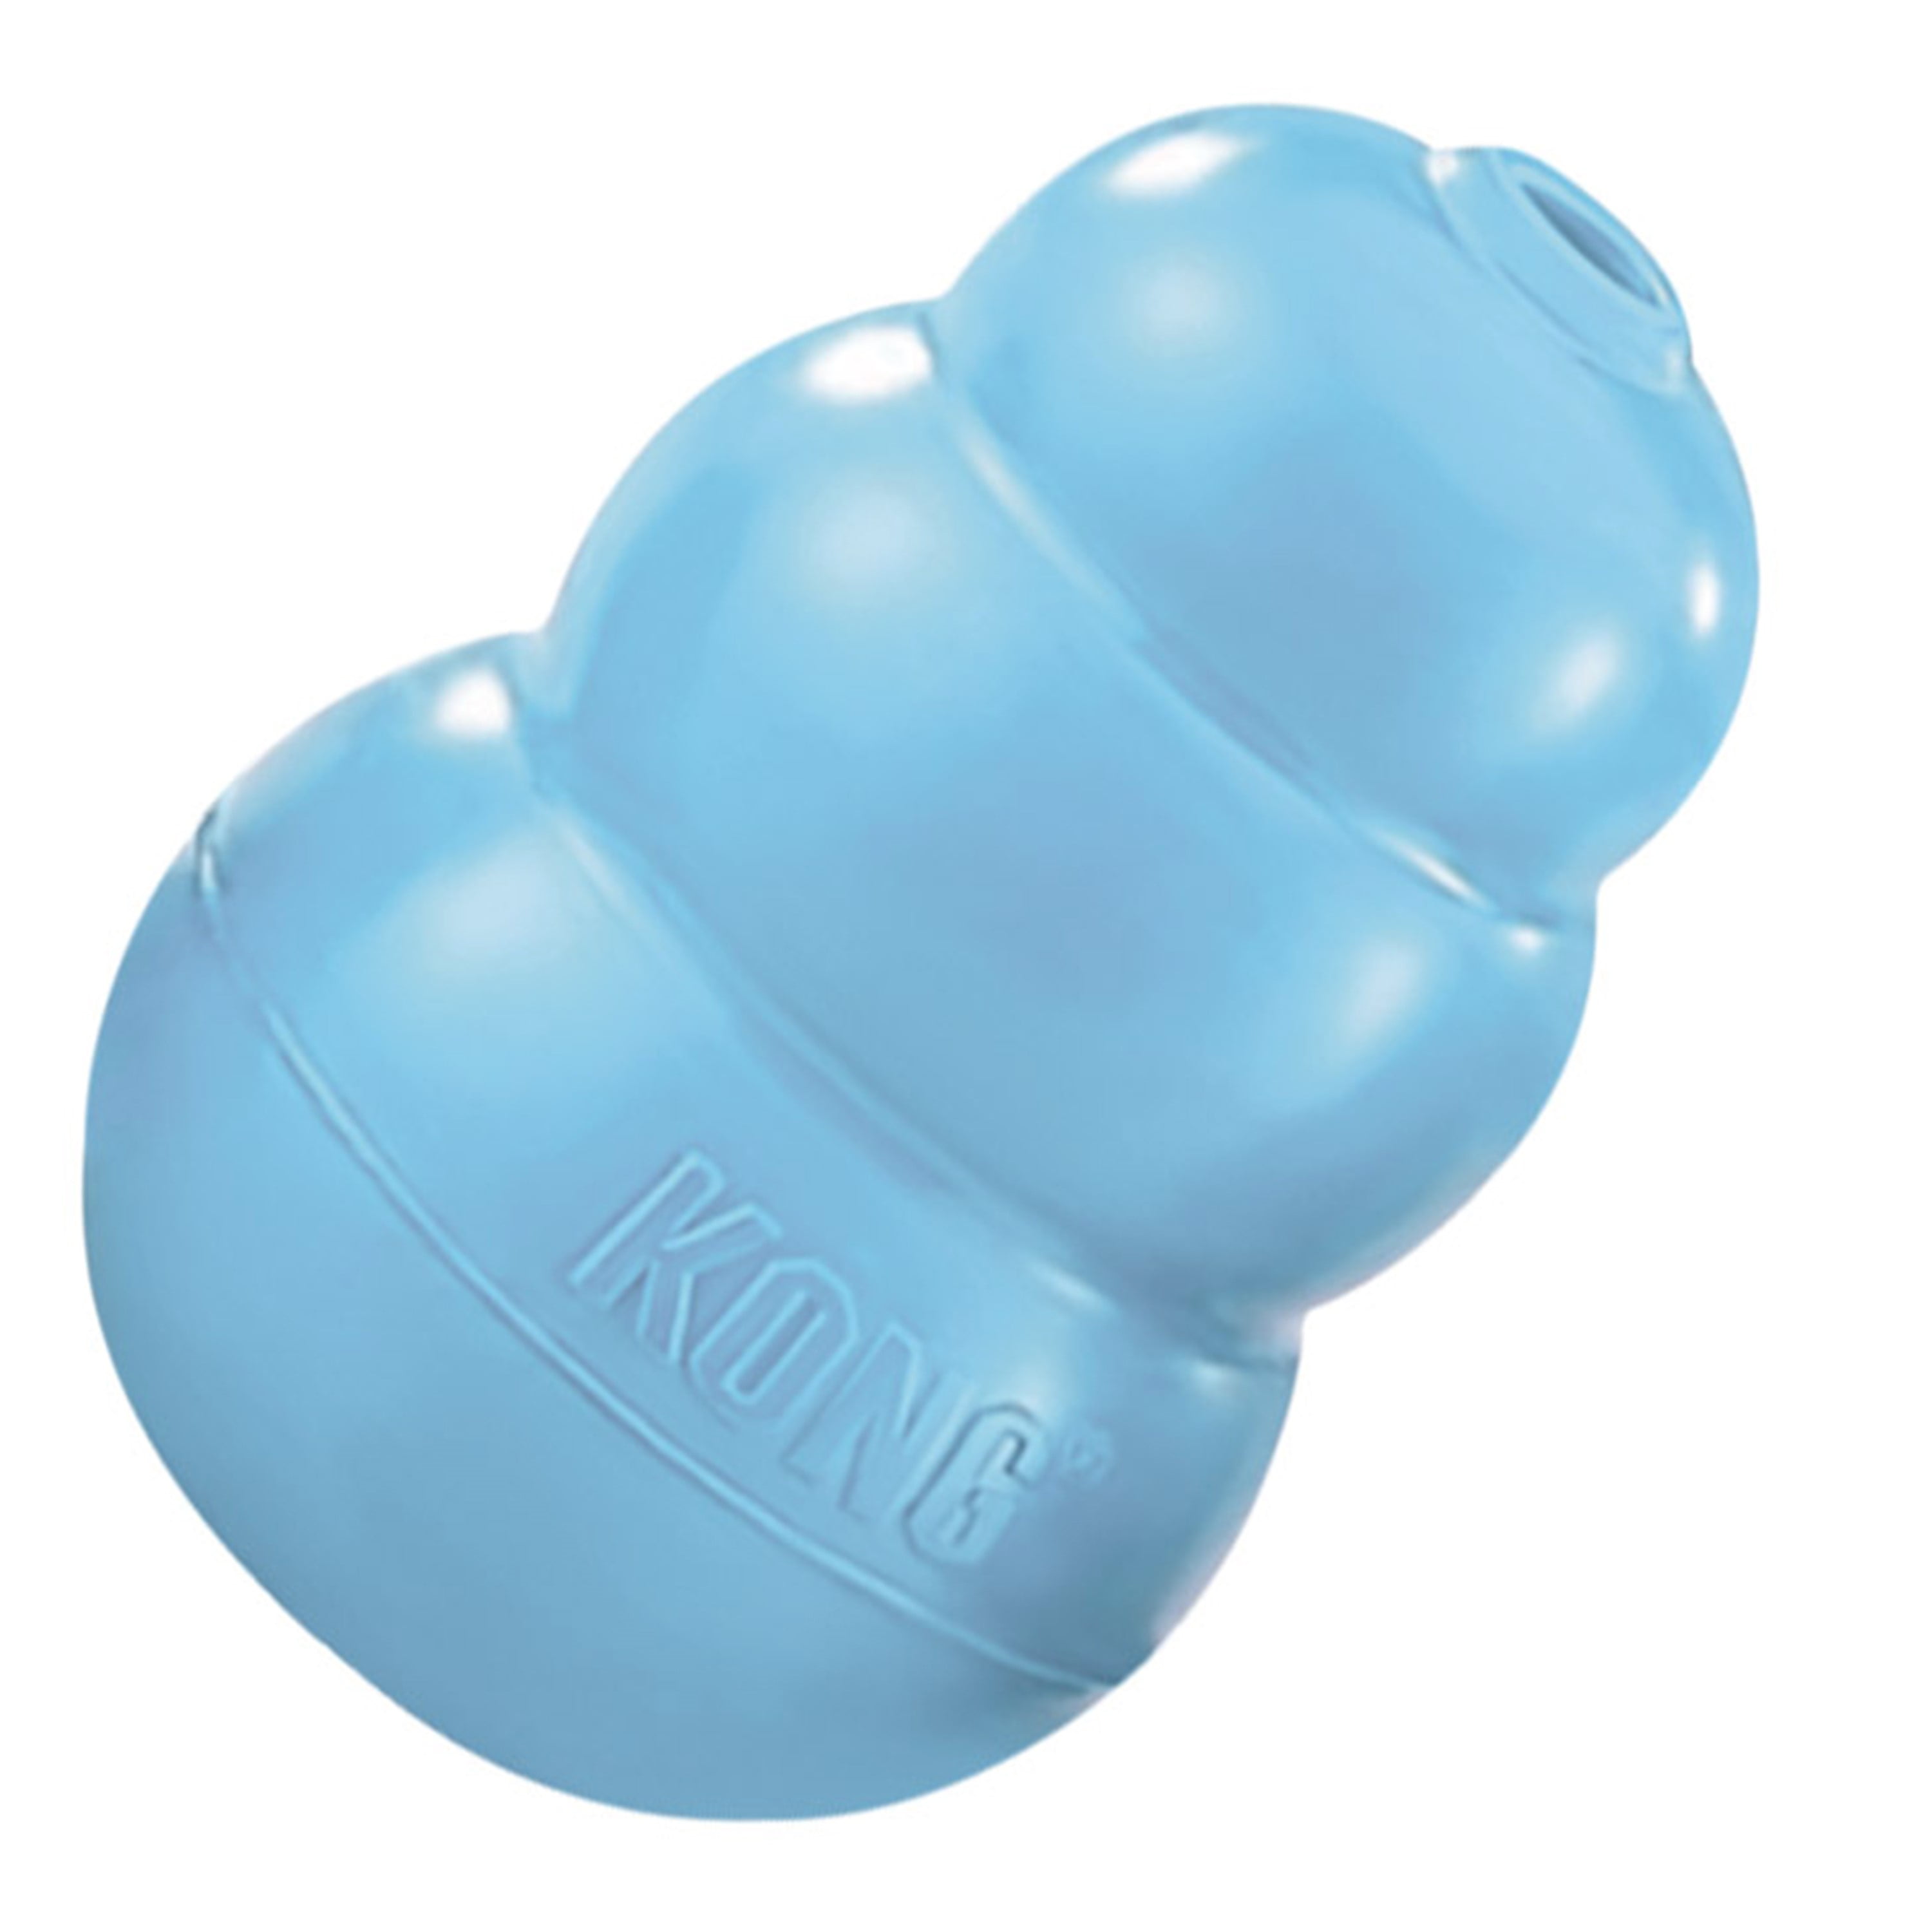 Dog Puppy Toy Squeak Treat Kong Small Extrme Goodie Ball NEW 